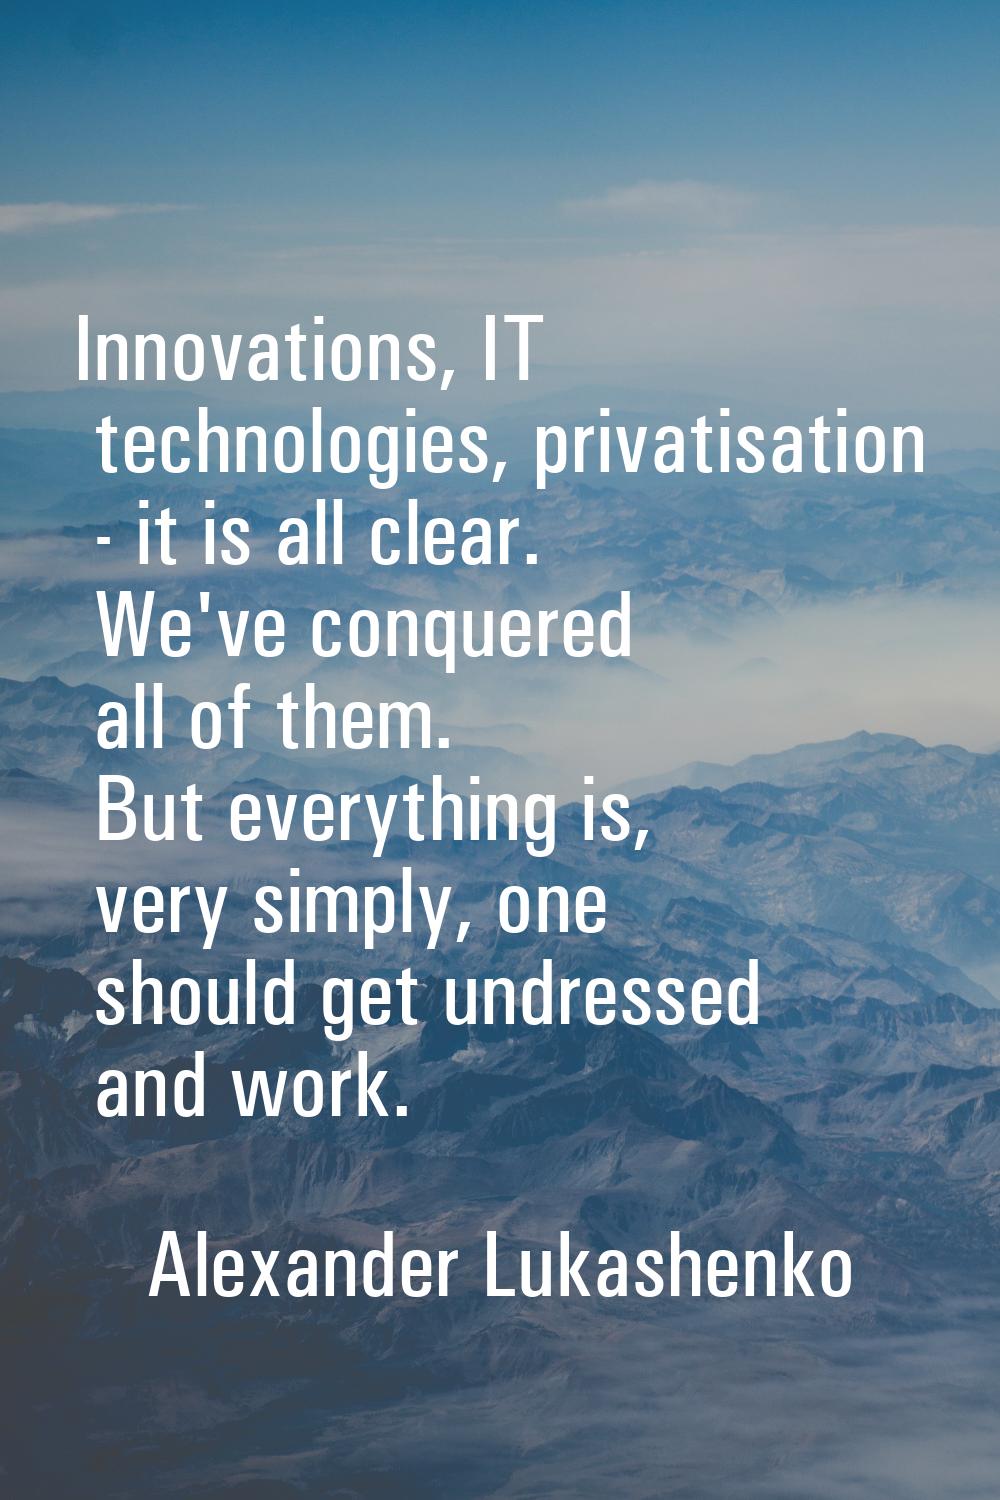 Innovations, IT technologies, privatisation - it is all clear. We've conquered all of them. But eve